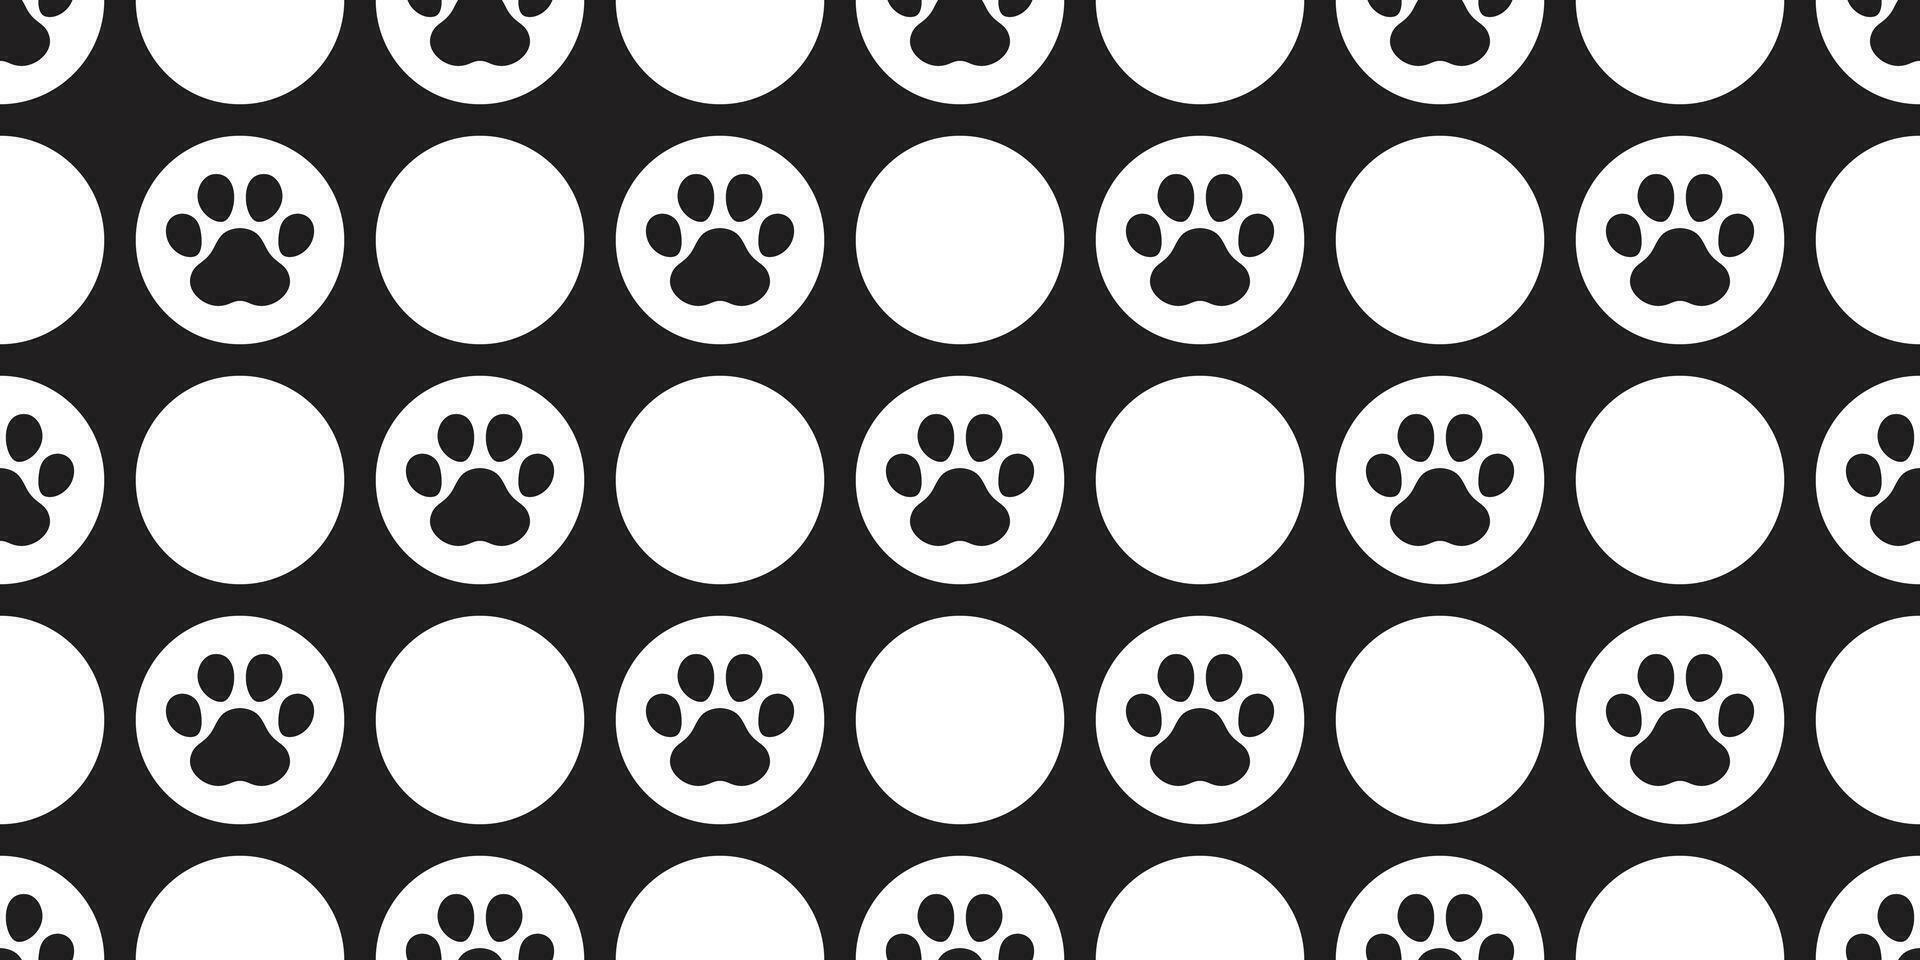 dog paw seamless pattern footprint vector polka dot french bulldog cartoon scarf isolated repeat wallpaper tile background illustration doodle black design